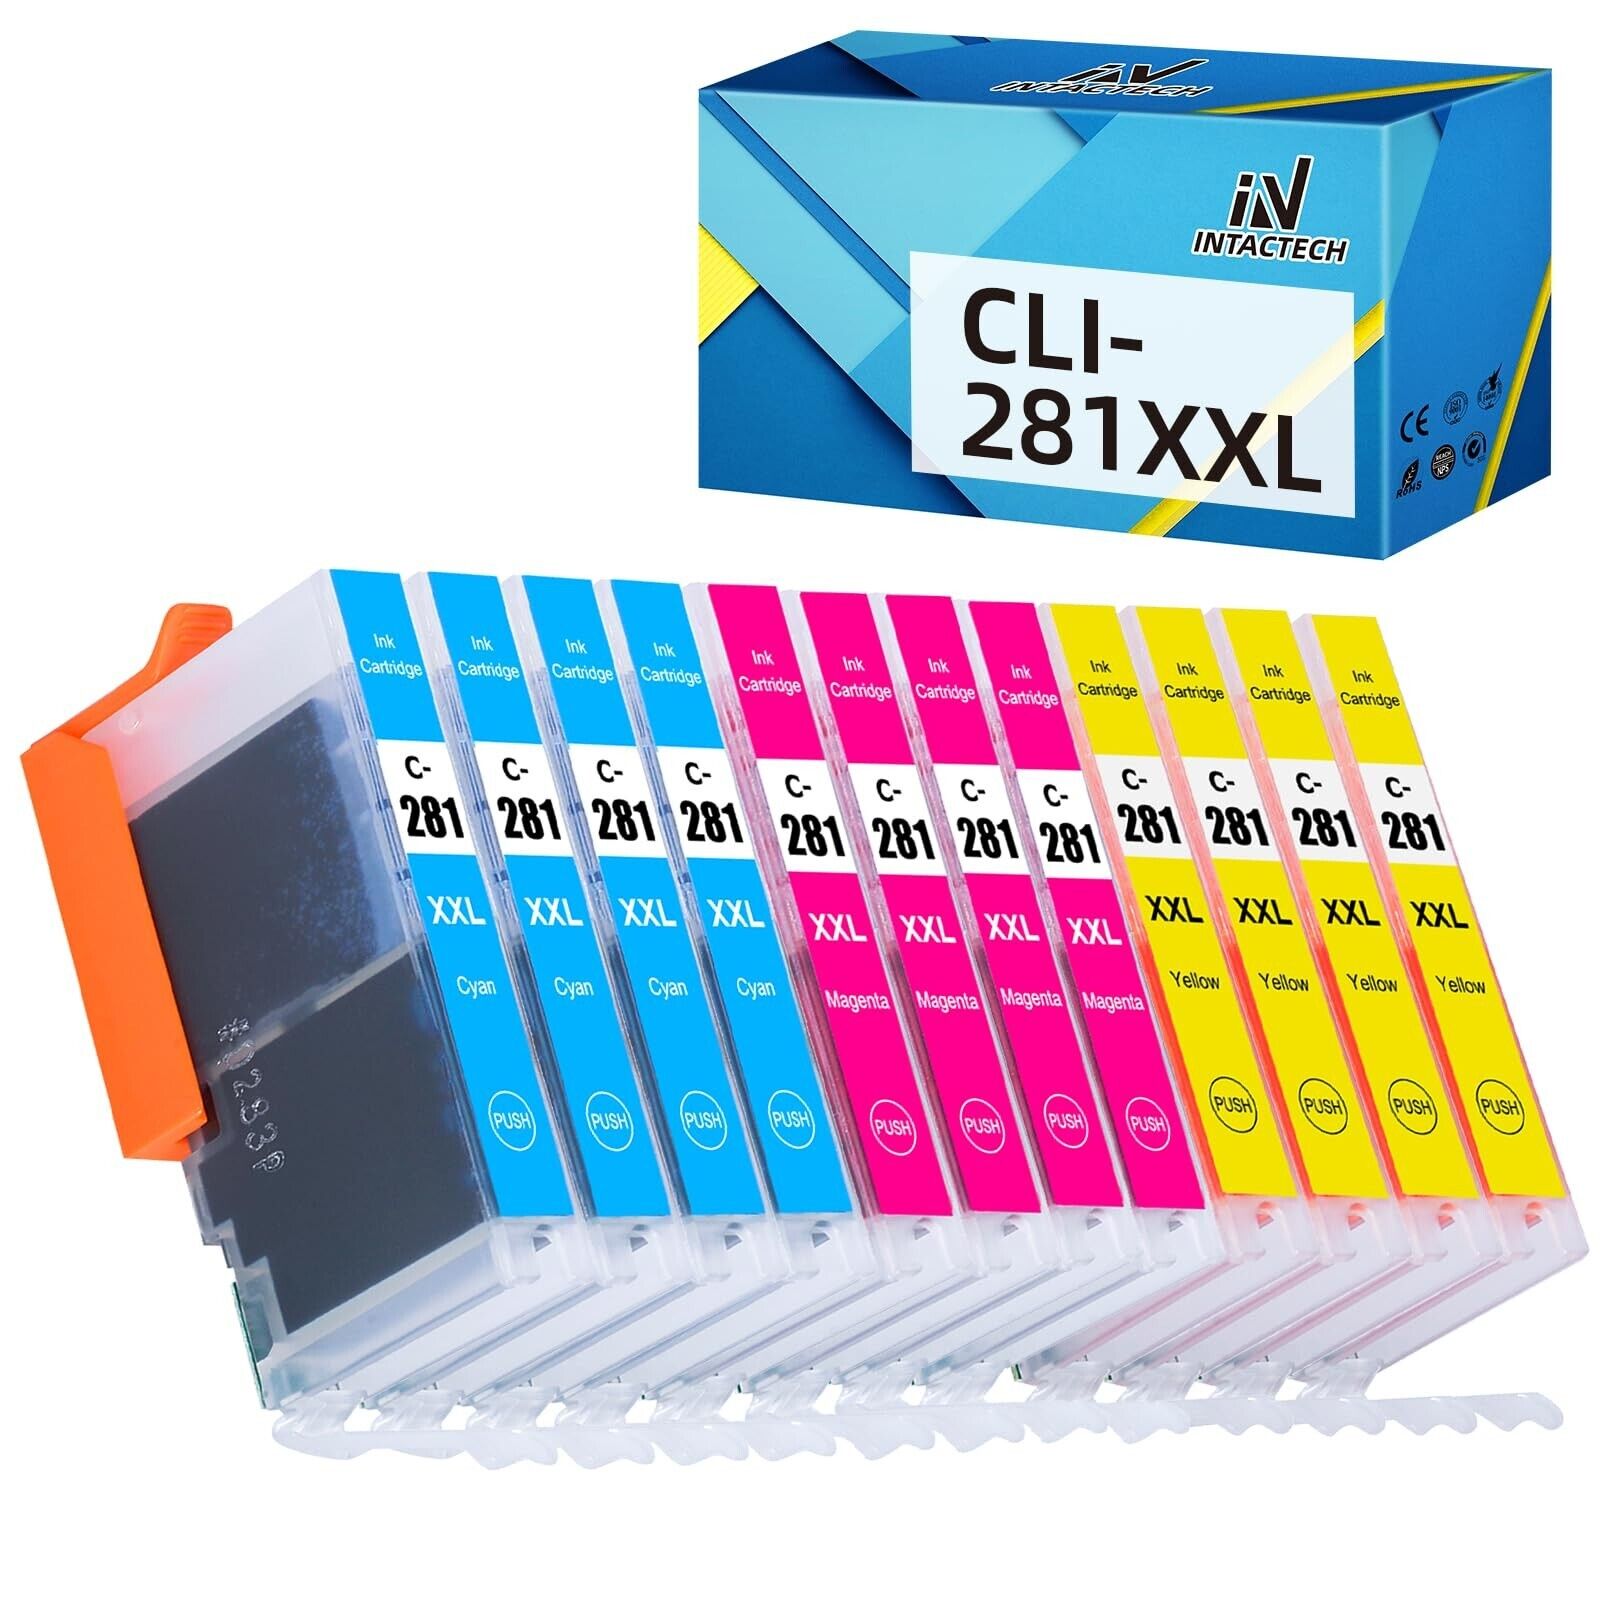 CLI-281 XXL Cyan/Magenta/Yellow-3 Color Ink Cartridges Compatible with Canon ...